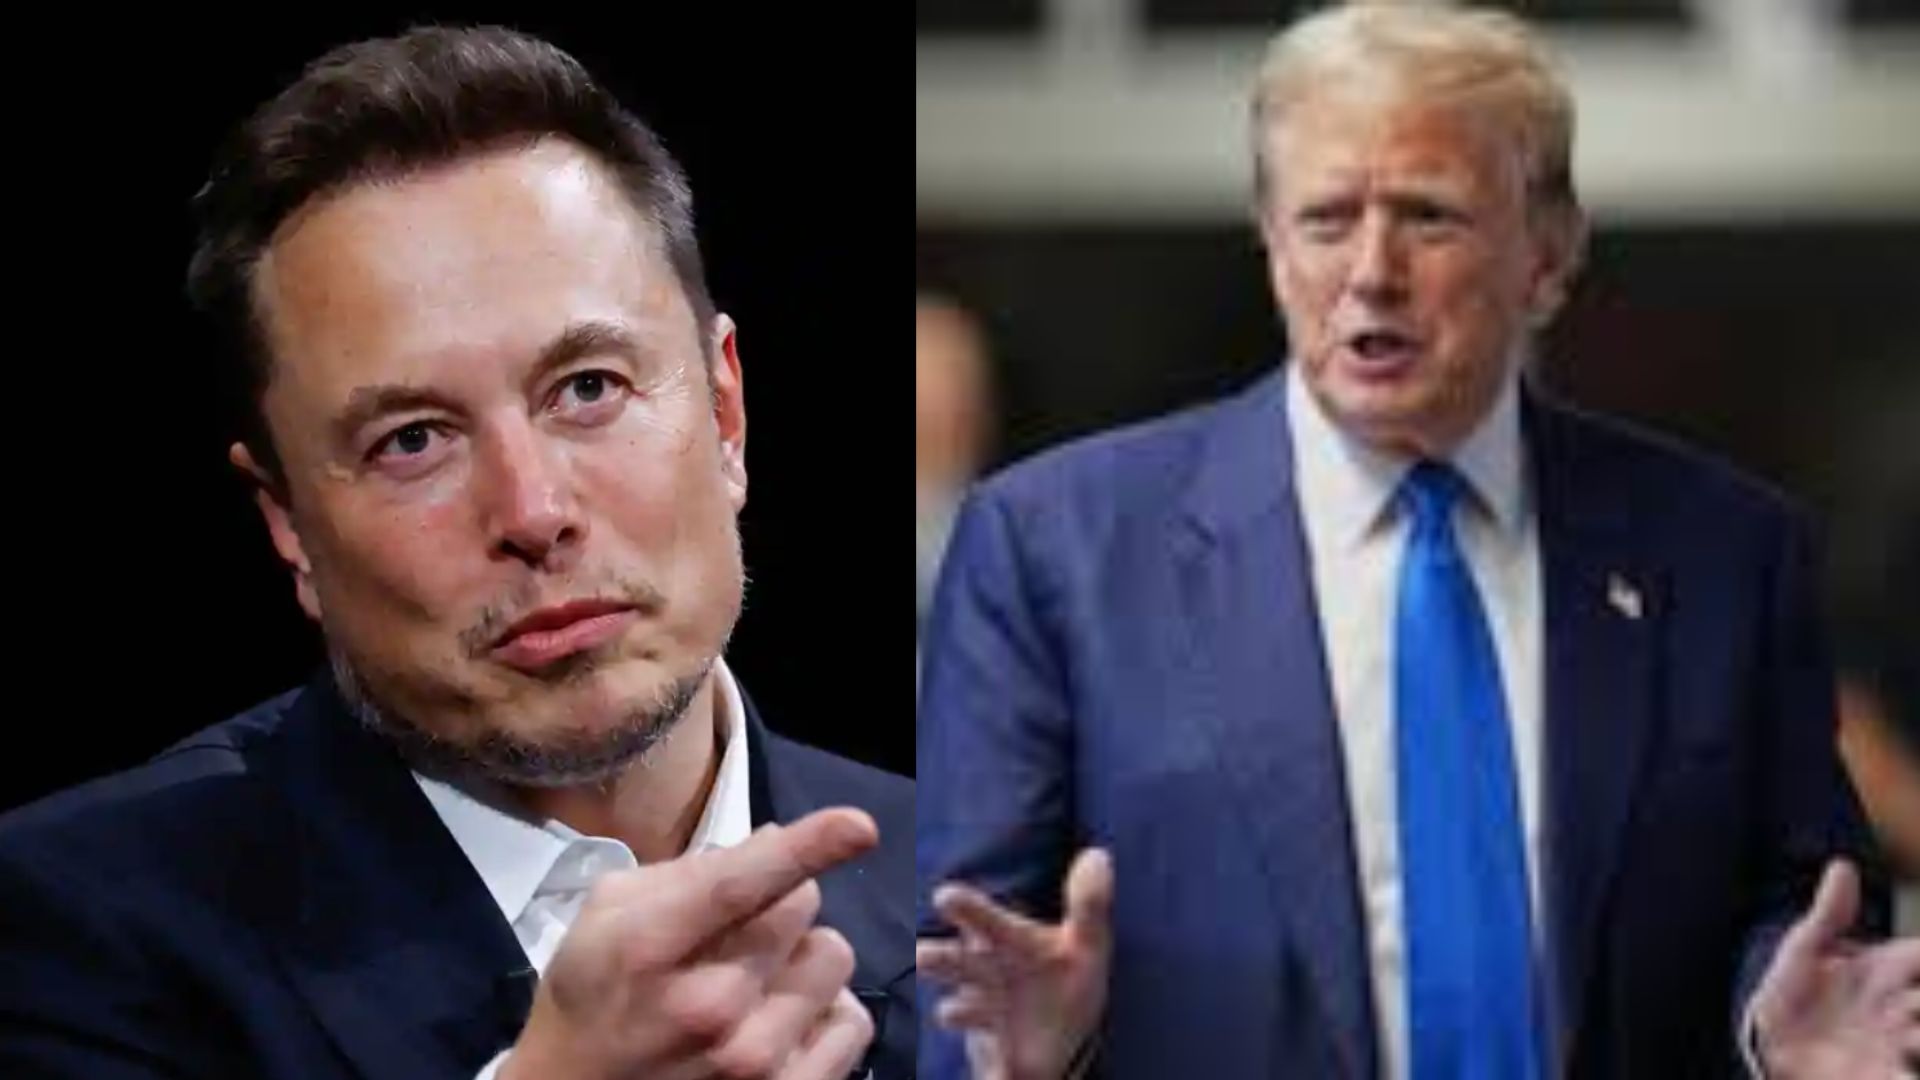 Elon Musk To Be Policy Advisor if Trump Returns to White House